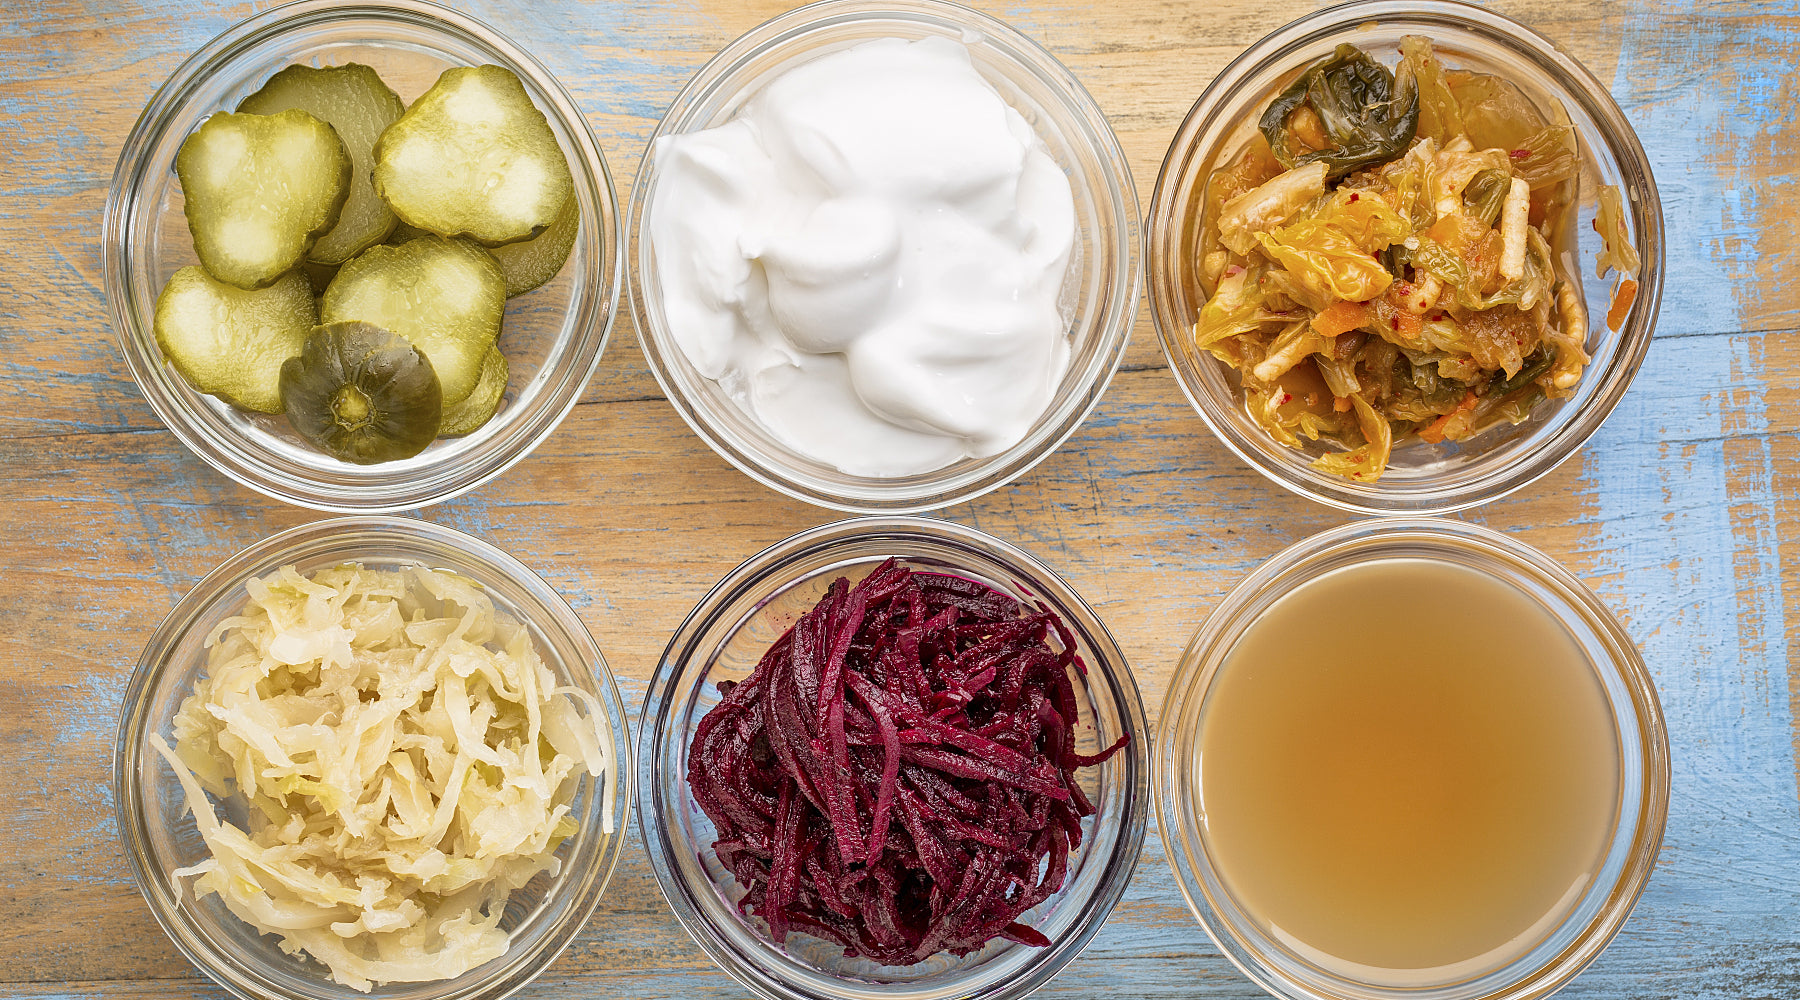 Six glass bowls of fermented foods, including pickles, yogurt, kimchi and beets